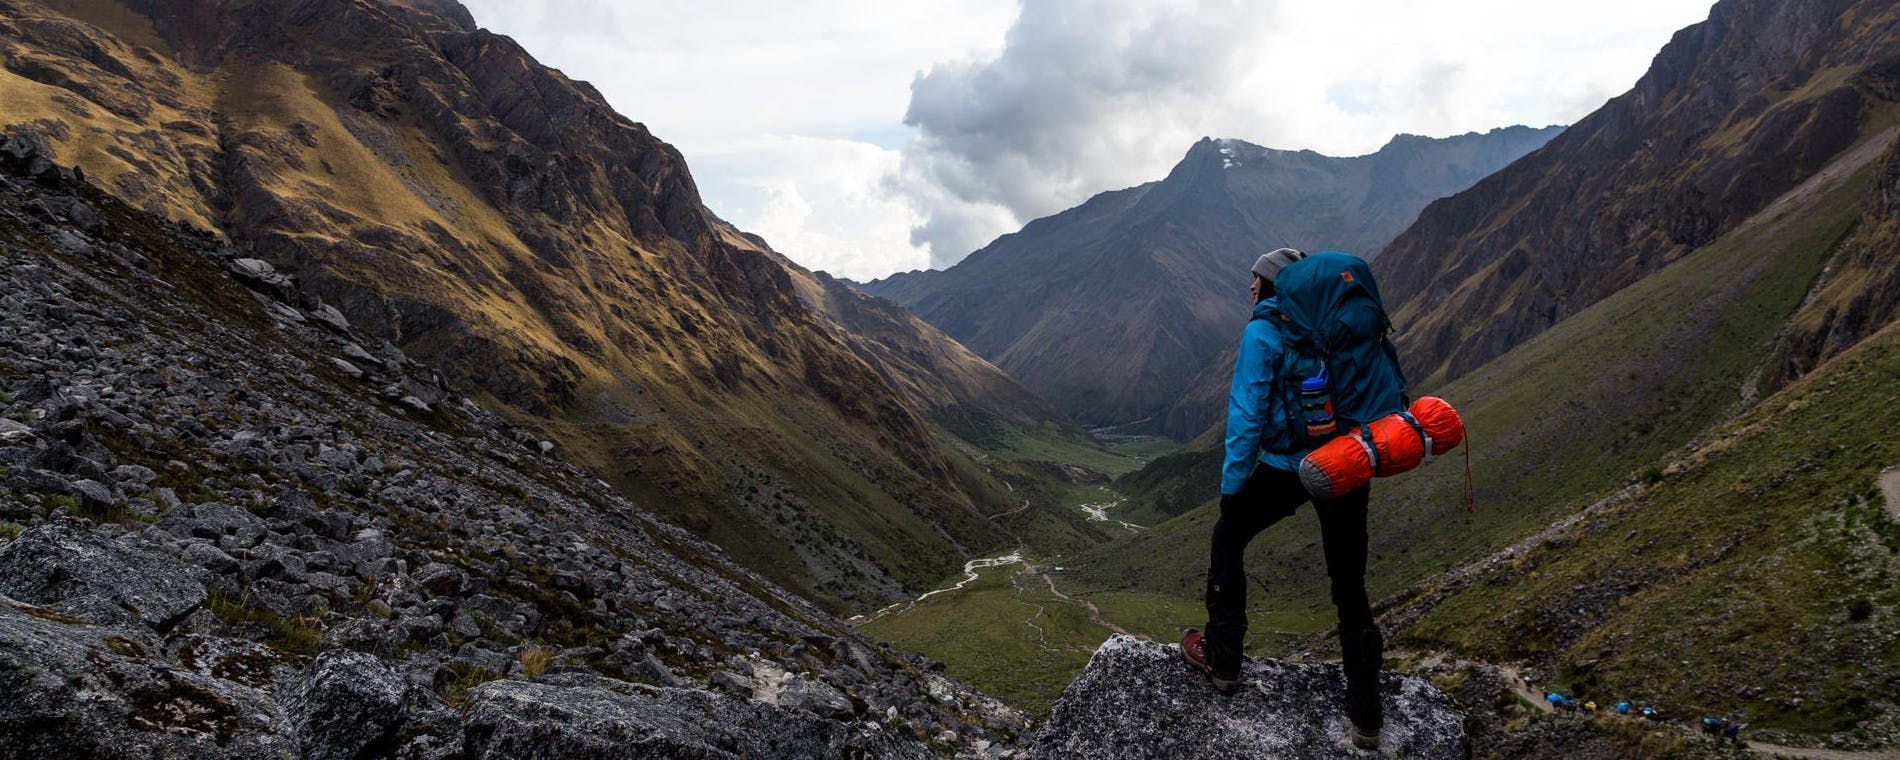 Kieren Britton hiking with a backpack and tent in a mountain valley